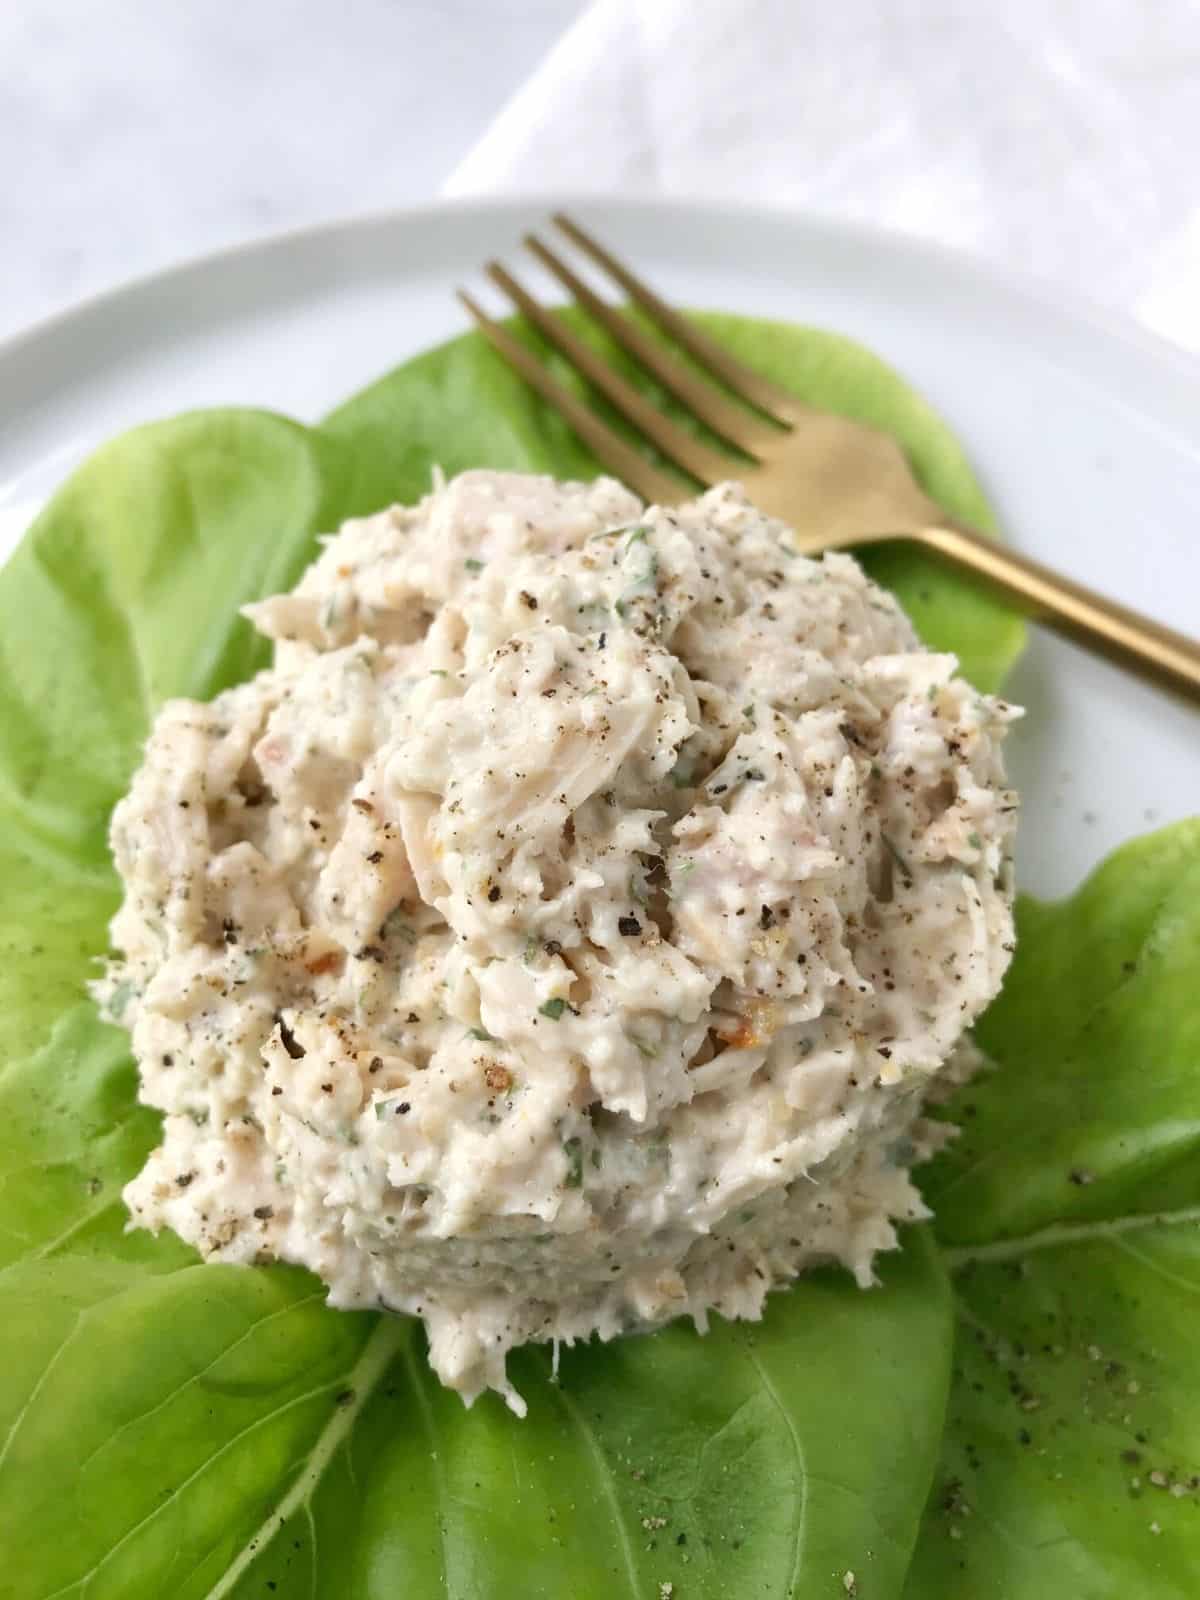 scoop of tuna on bed of lettuce